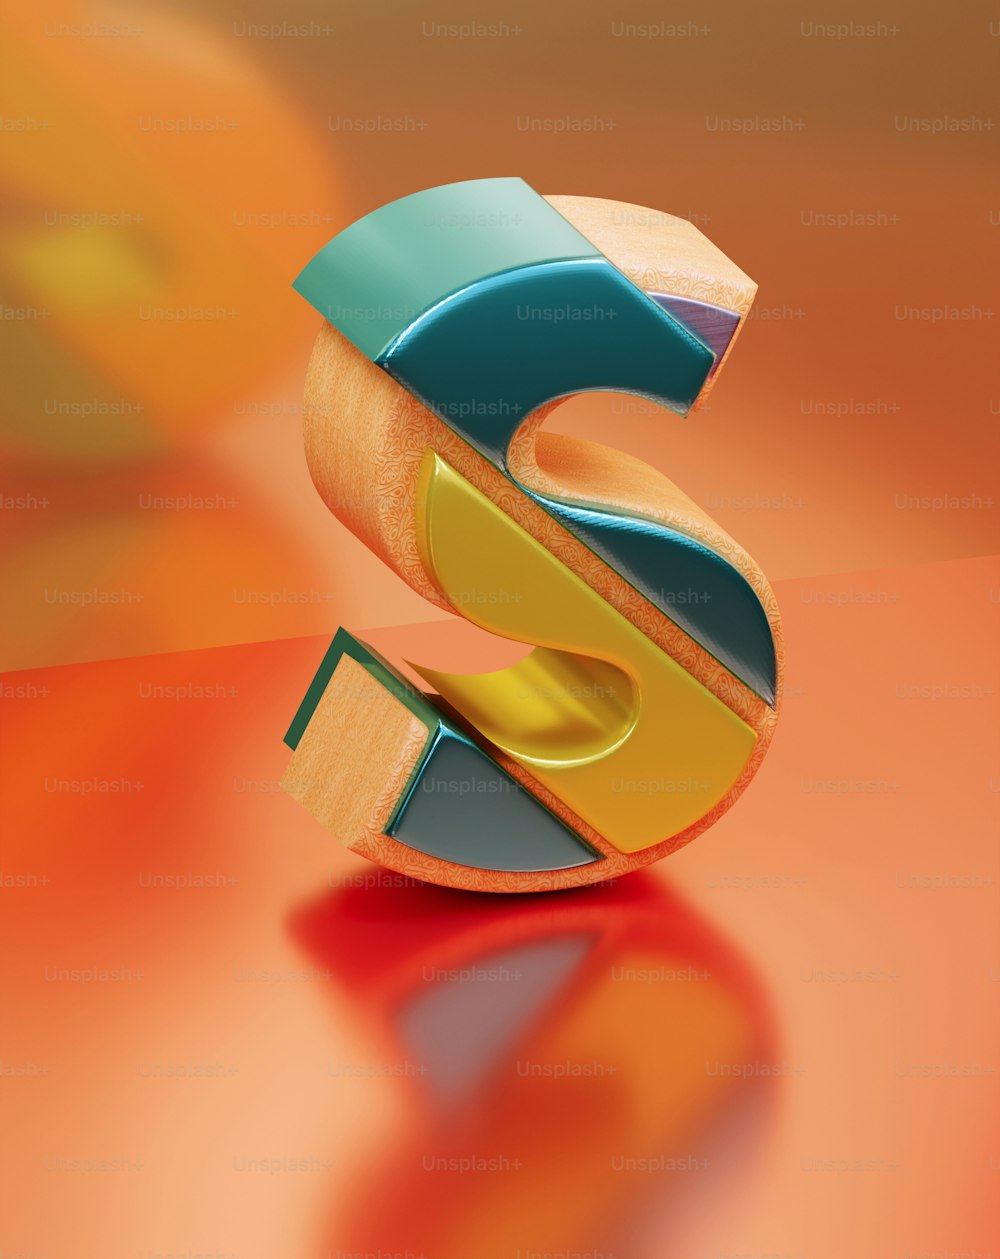 A 3d image of the letter s on a table photo – Letter Image on Unsplash